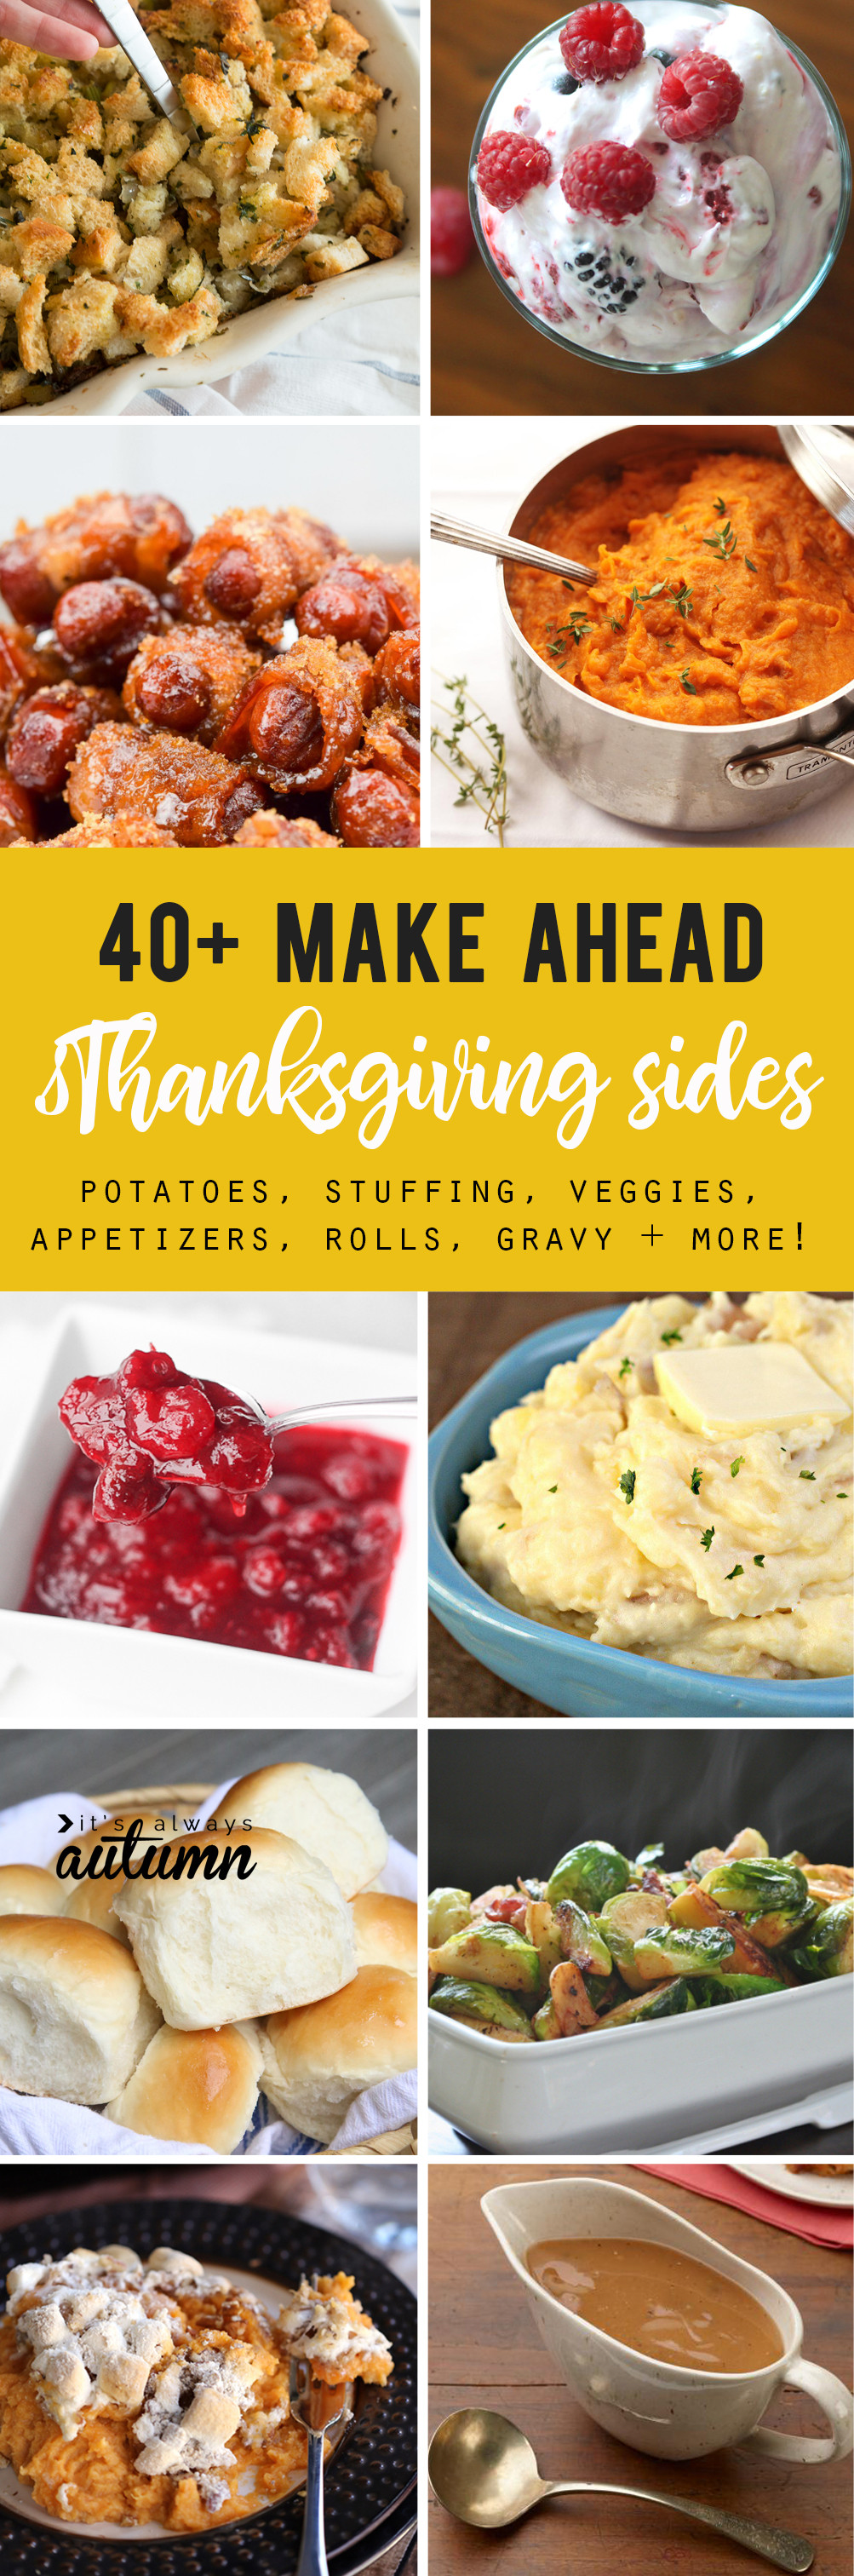 Thanksgiving Make Ahead Recipes
 the BEST LIST of Thanksgiving side dishes you can make